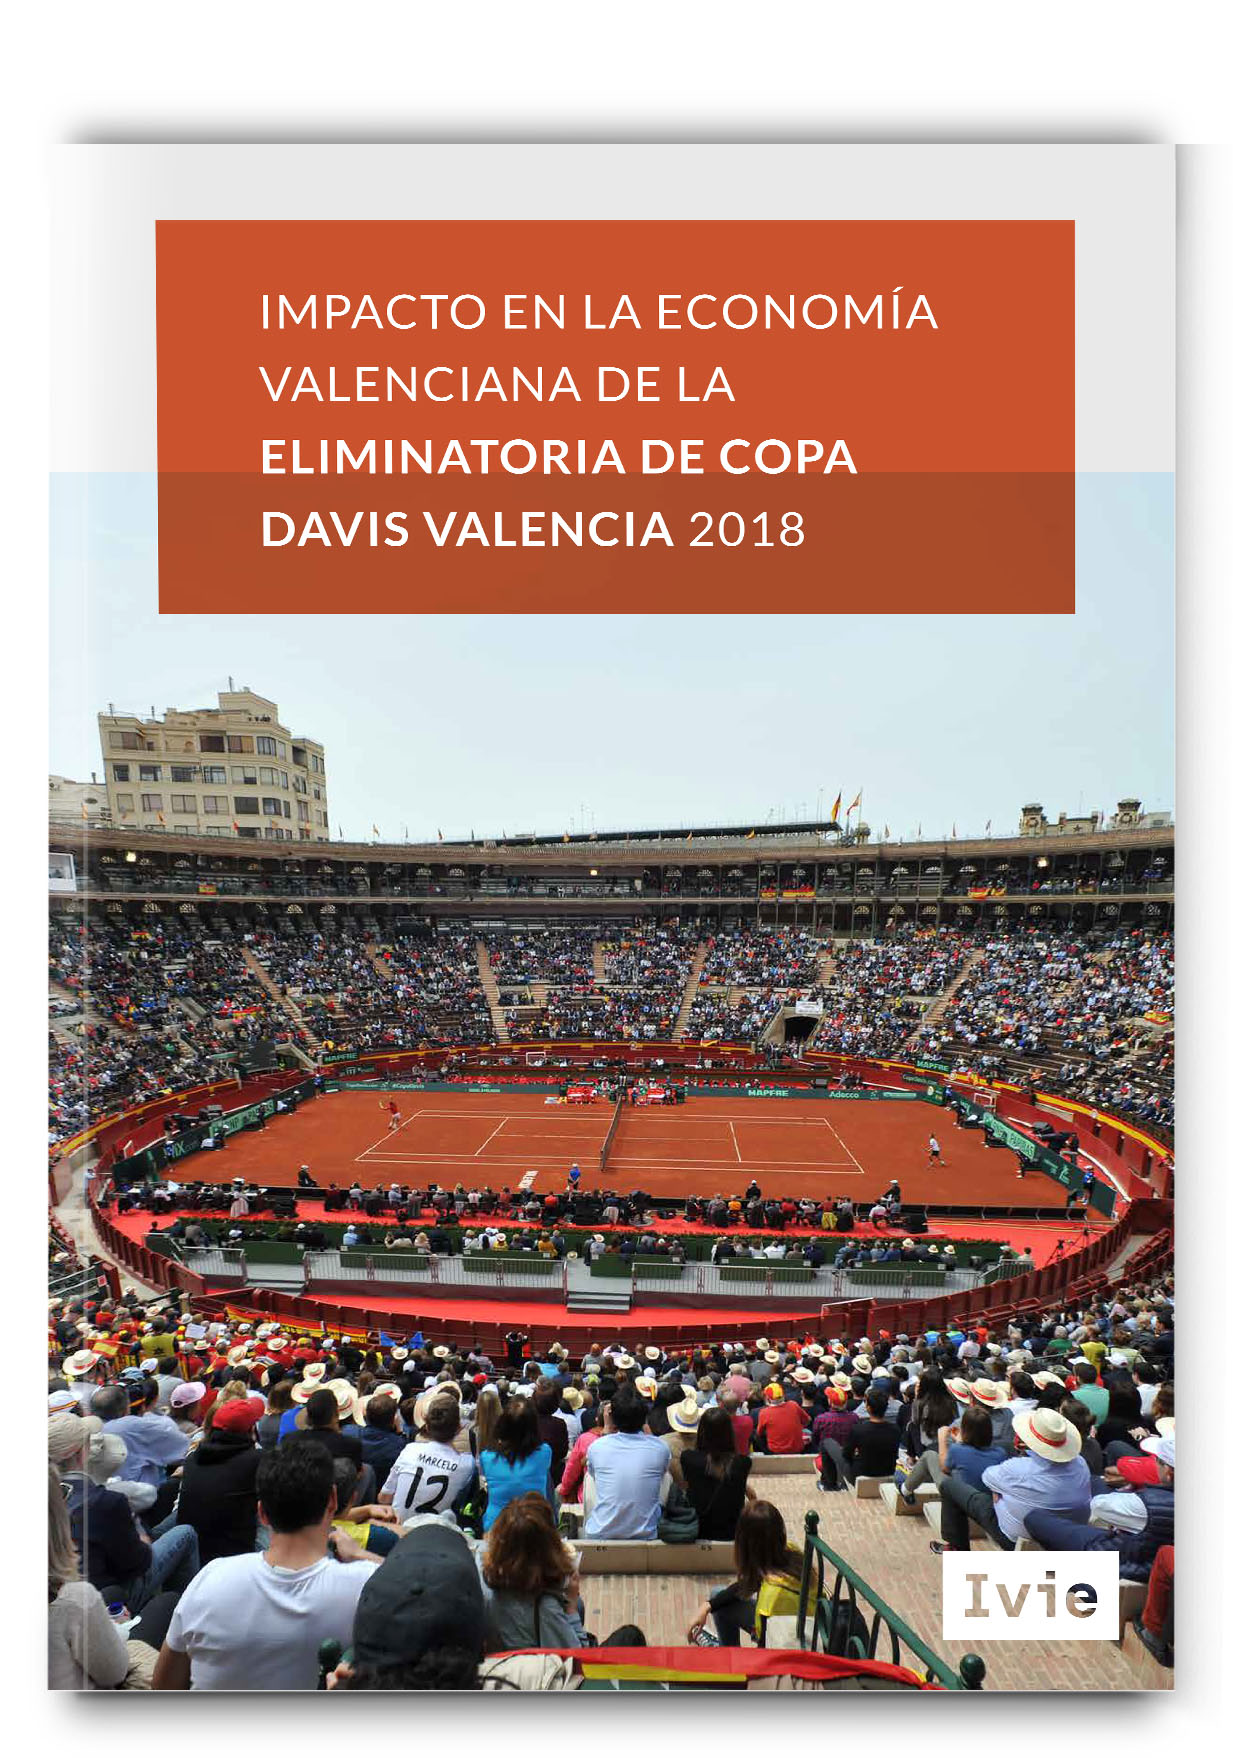 Economic impact assessment of the Davis Cup tennis tournament in the Valencian Community 